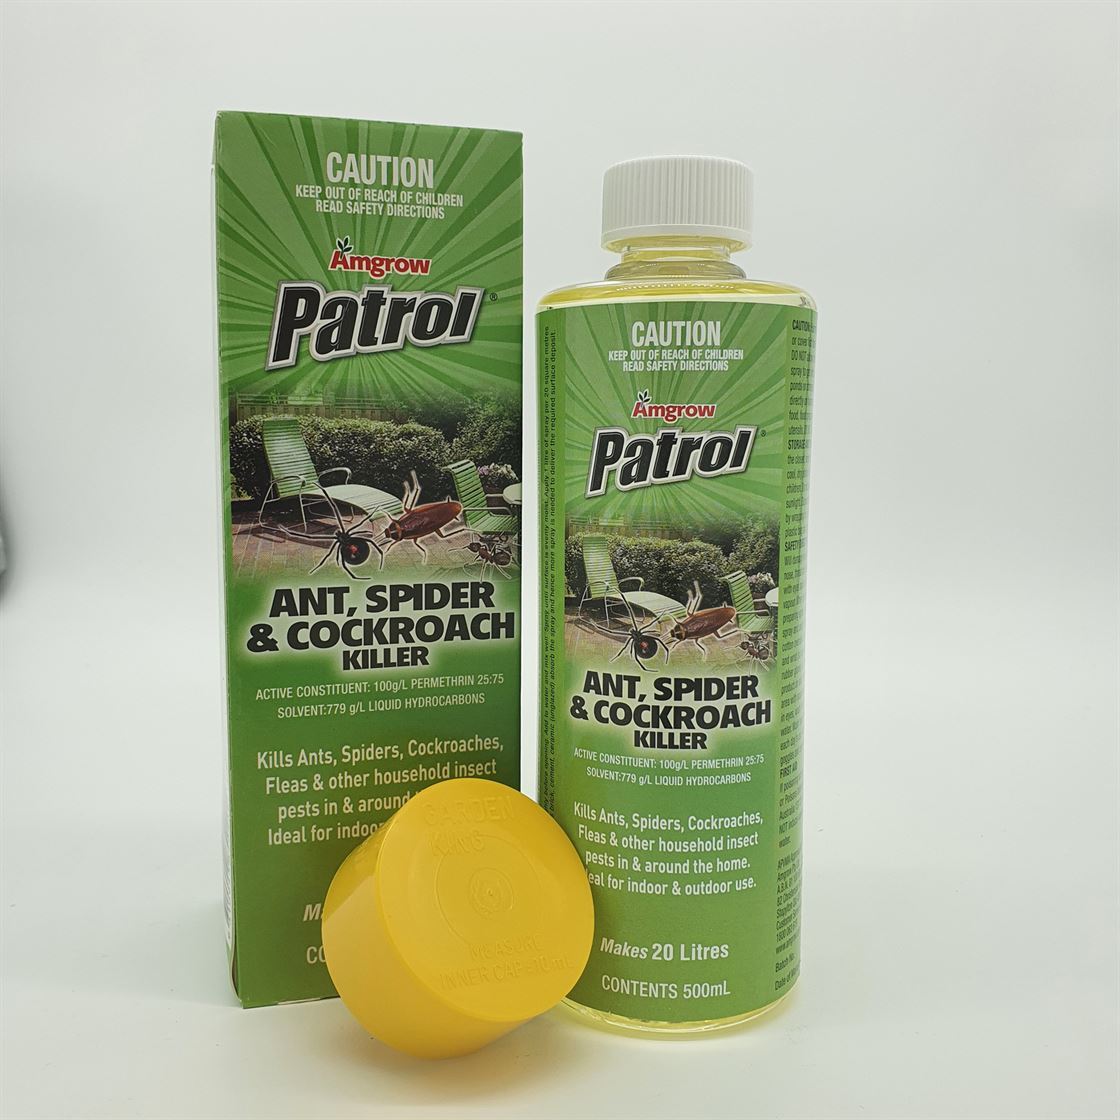 Amgrow Patrol Ant, Spider & Cockroach Killer 500ml Concentrate